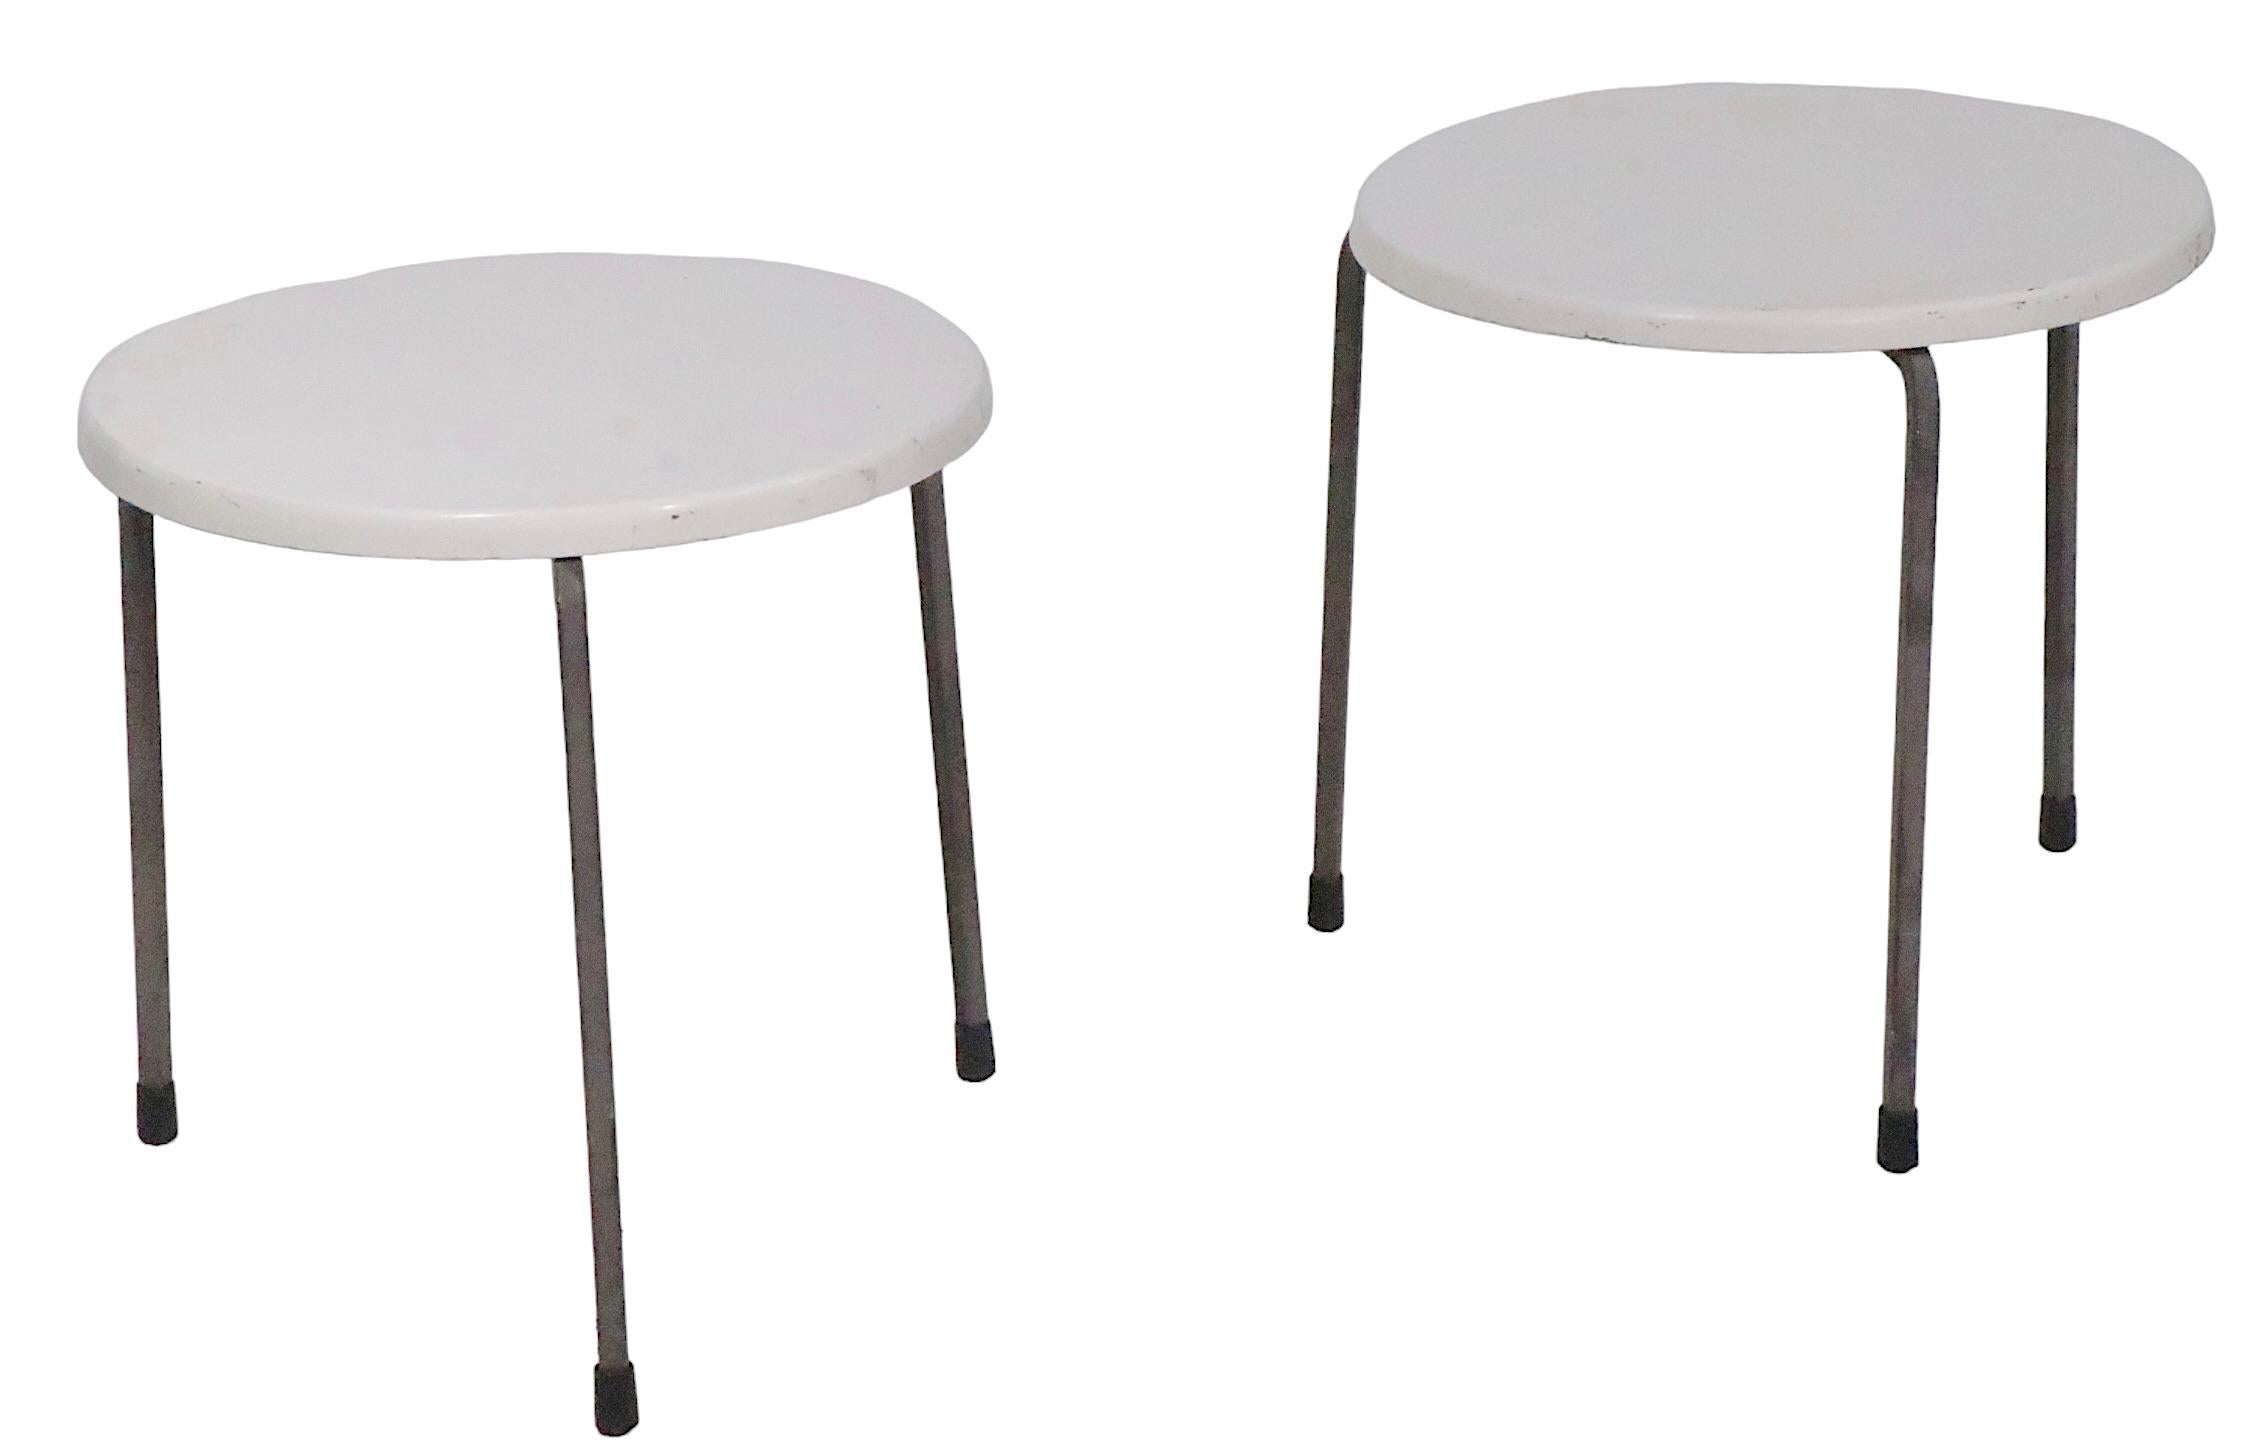 Pr.  Mid Century Patio Poolside Tables by Fibreform Made in Florida c.1950/1970s For Sale 8